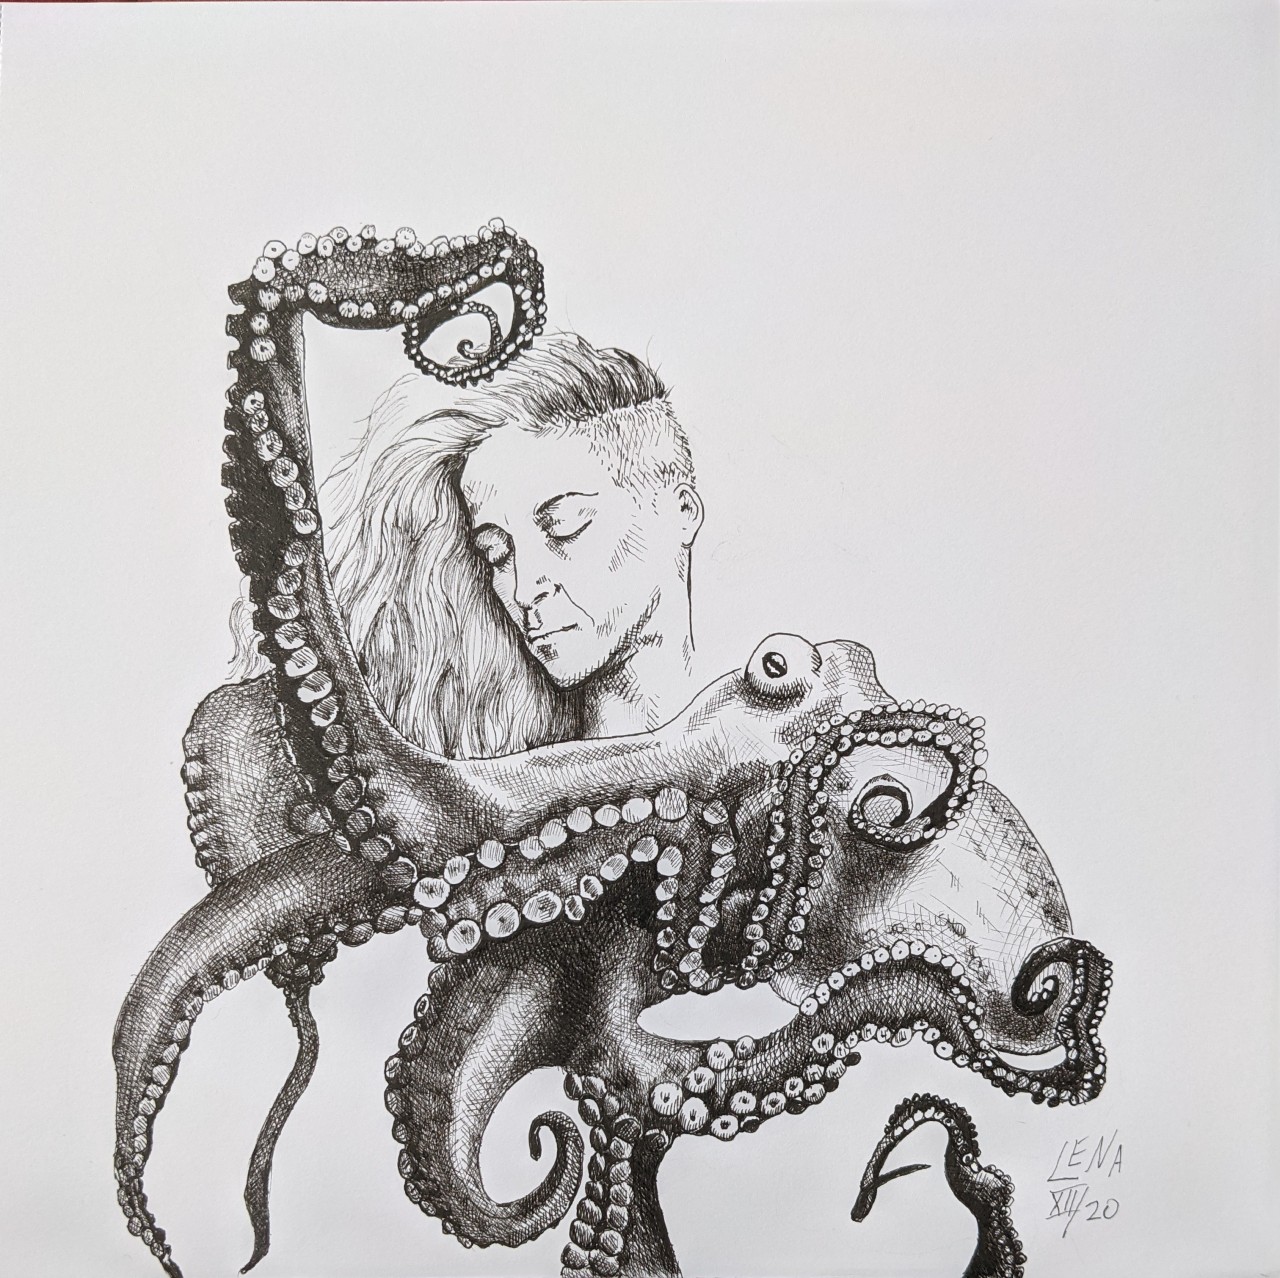 Self-portraits with an octopus